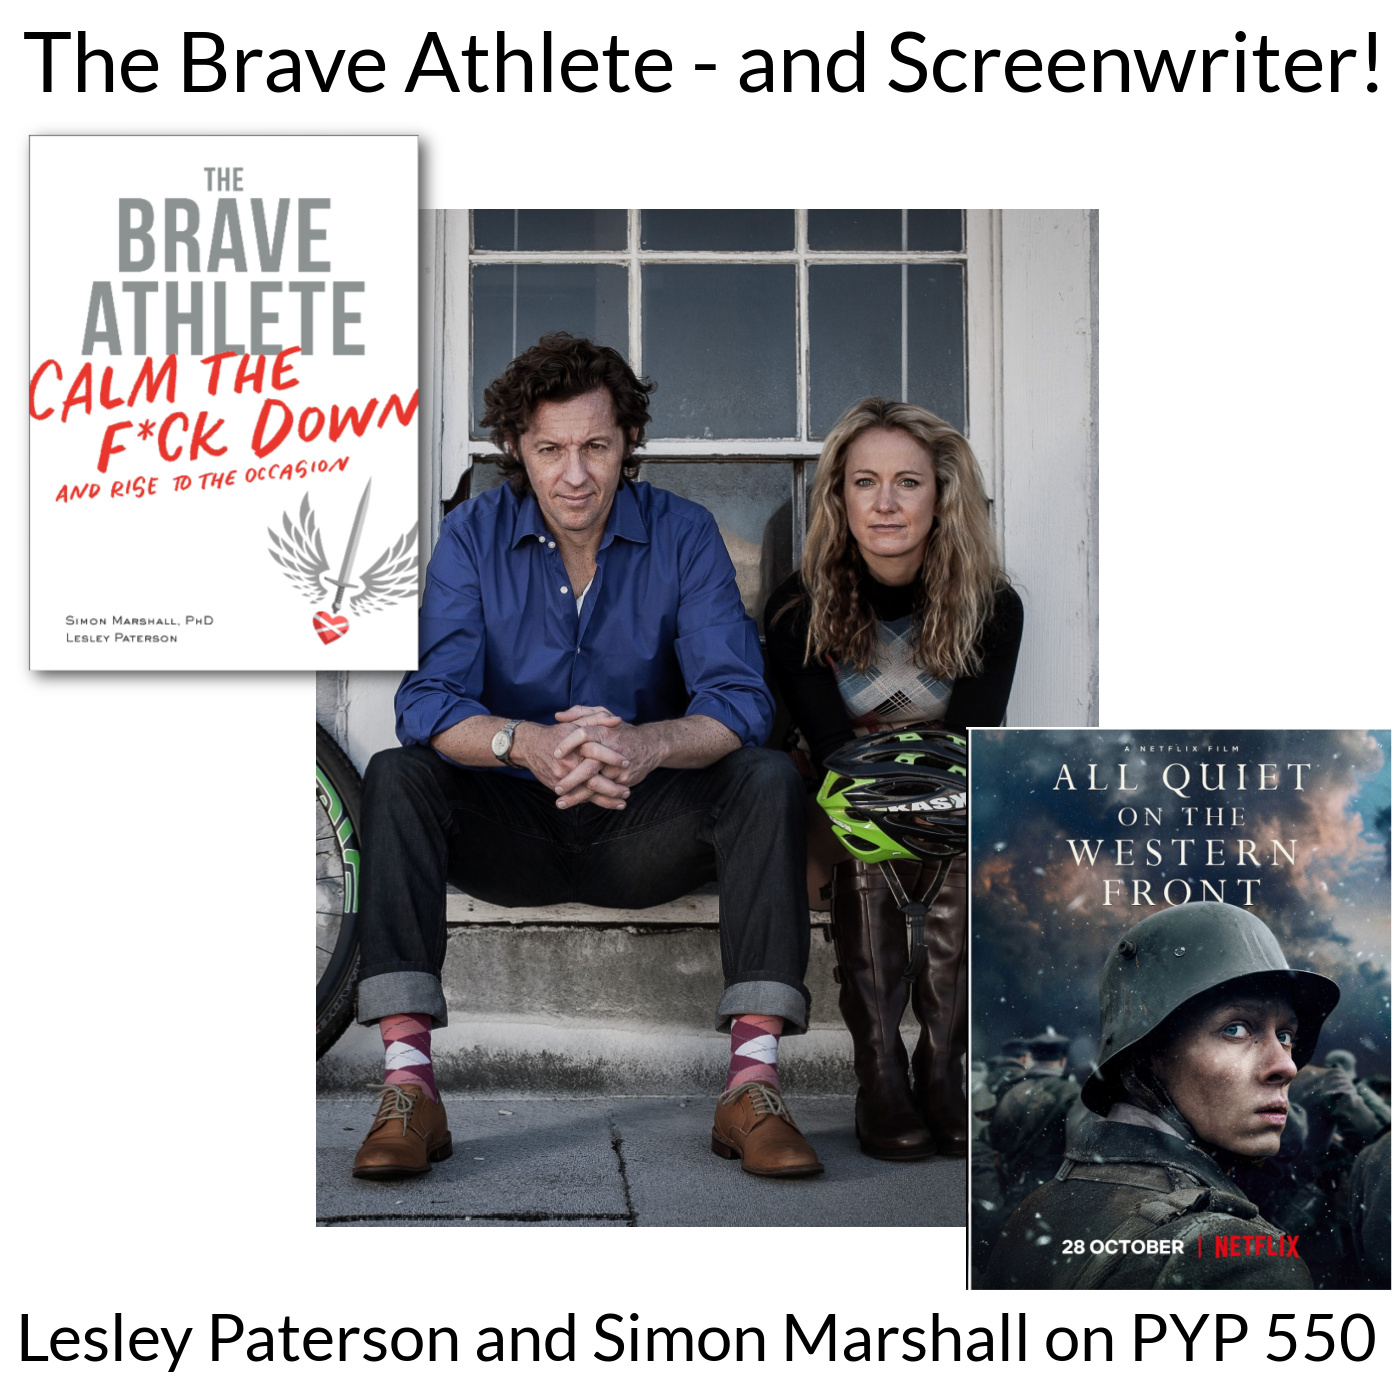 The Brave Athlete -- and Screenwriter!: Simon Marshall and Lesley Paterson on PYP 550